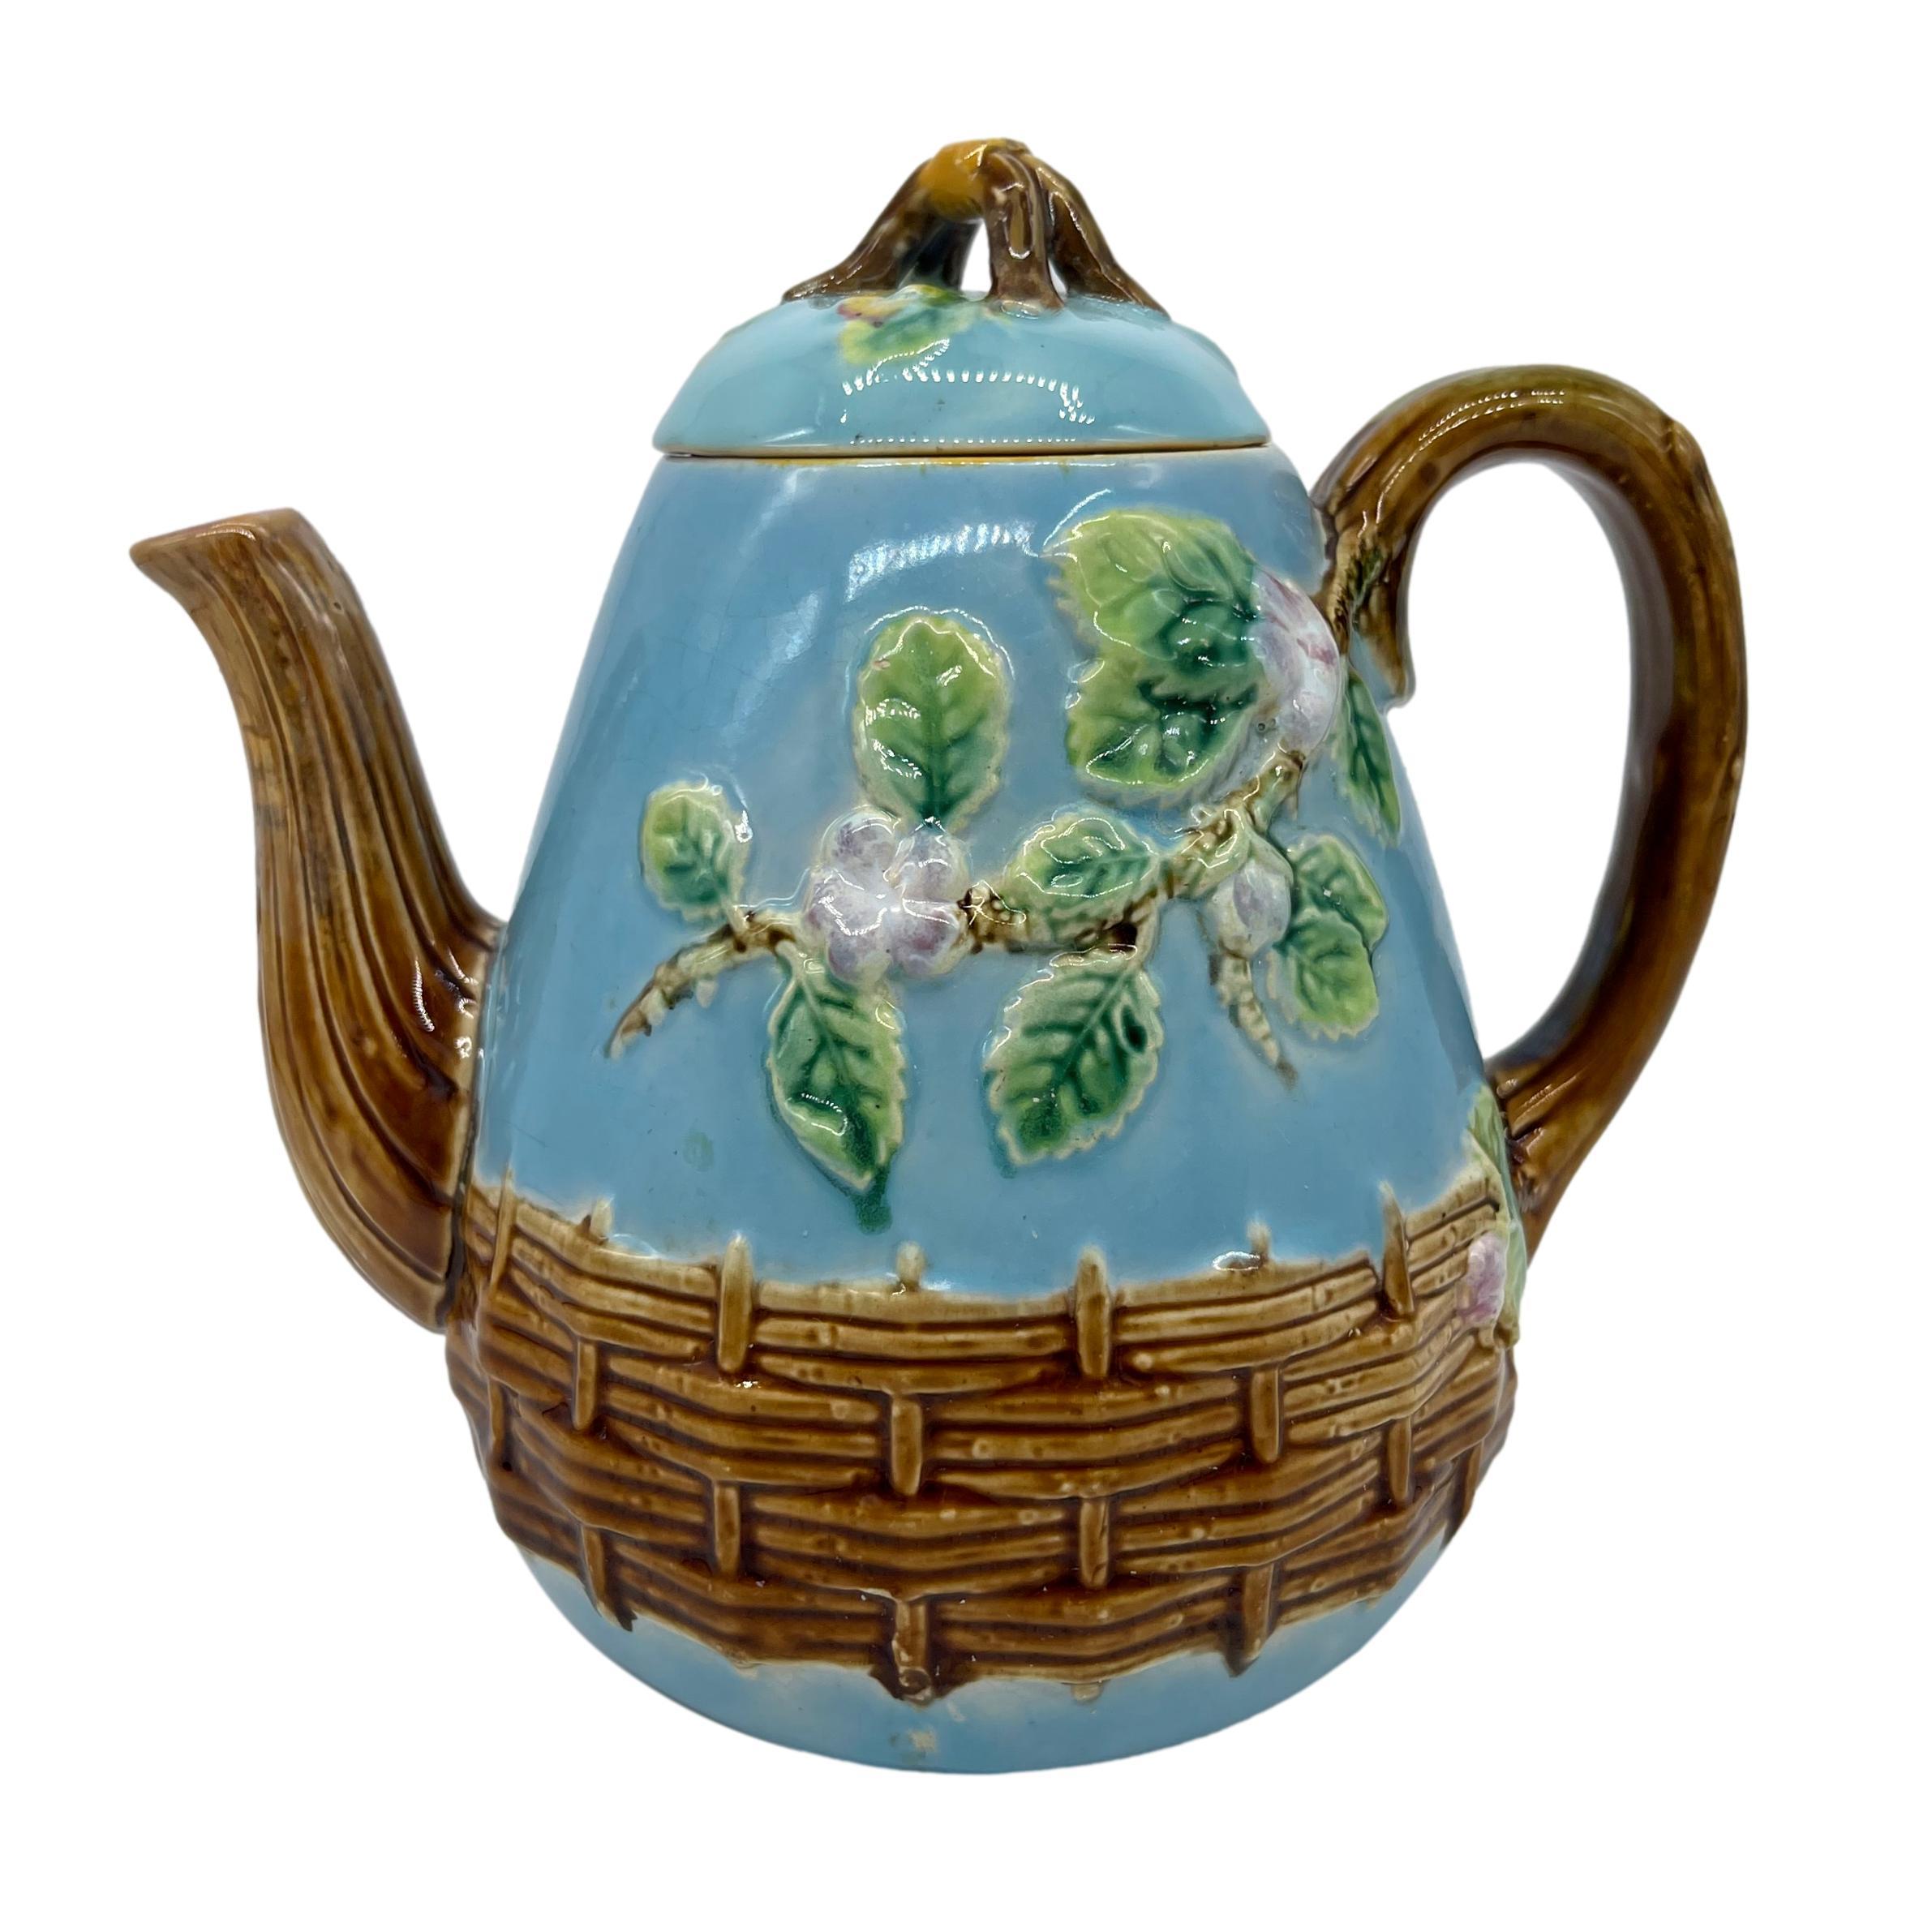 George Jones Majolica 'Apple Blossom' Teapot, the pear-shaped teapot and lid molded with blooming apple tree limbs, with a mossy branch handle and spout, with basketweave banding, the cover surmounted by yellow-banded twigs forming the knop, the